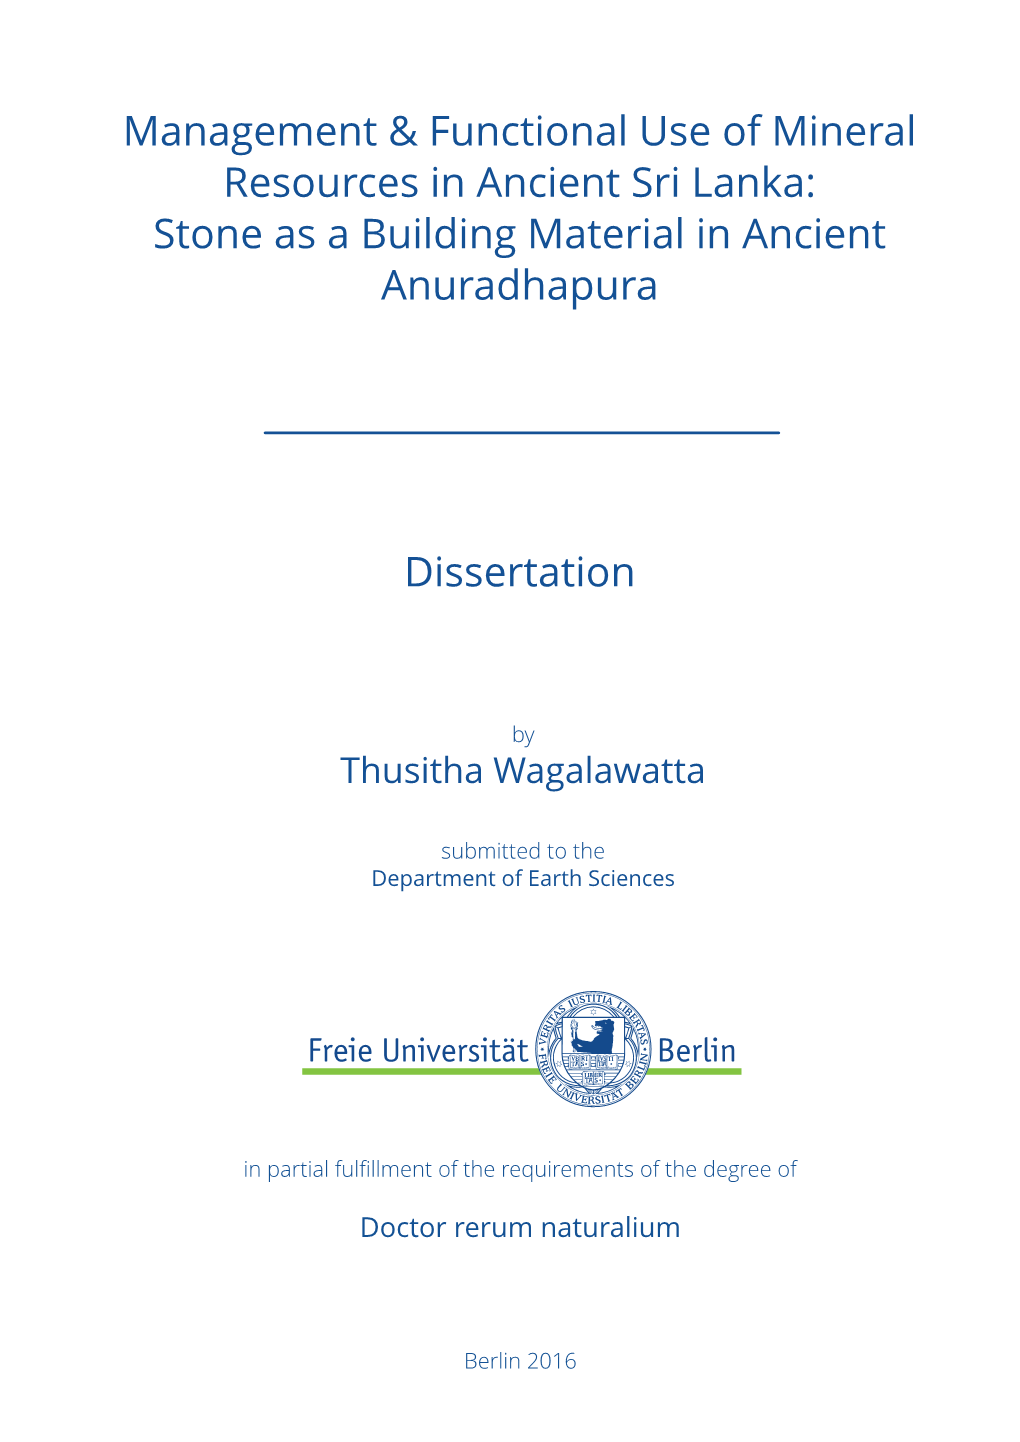 Stone As a Building Material in Ancient Anuradhapura